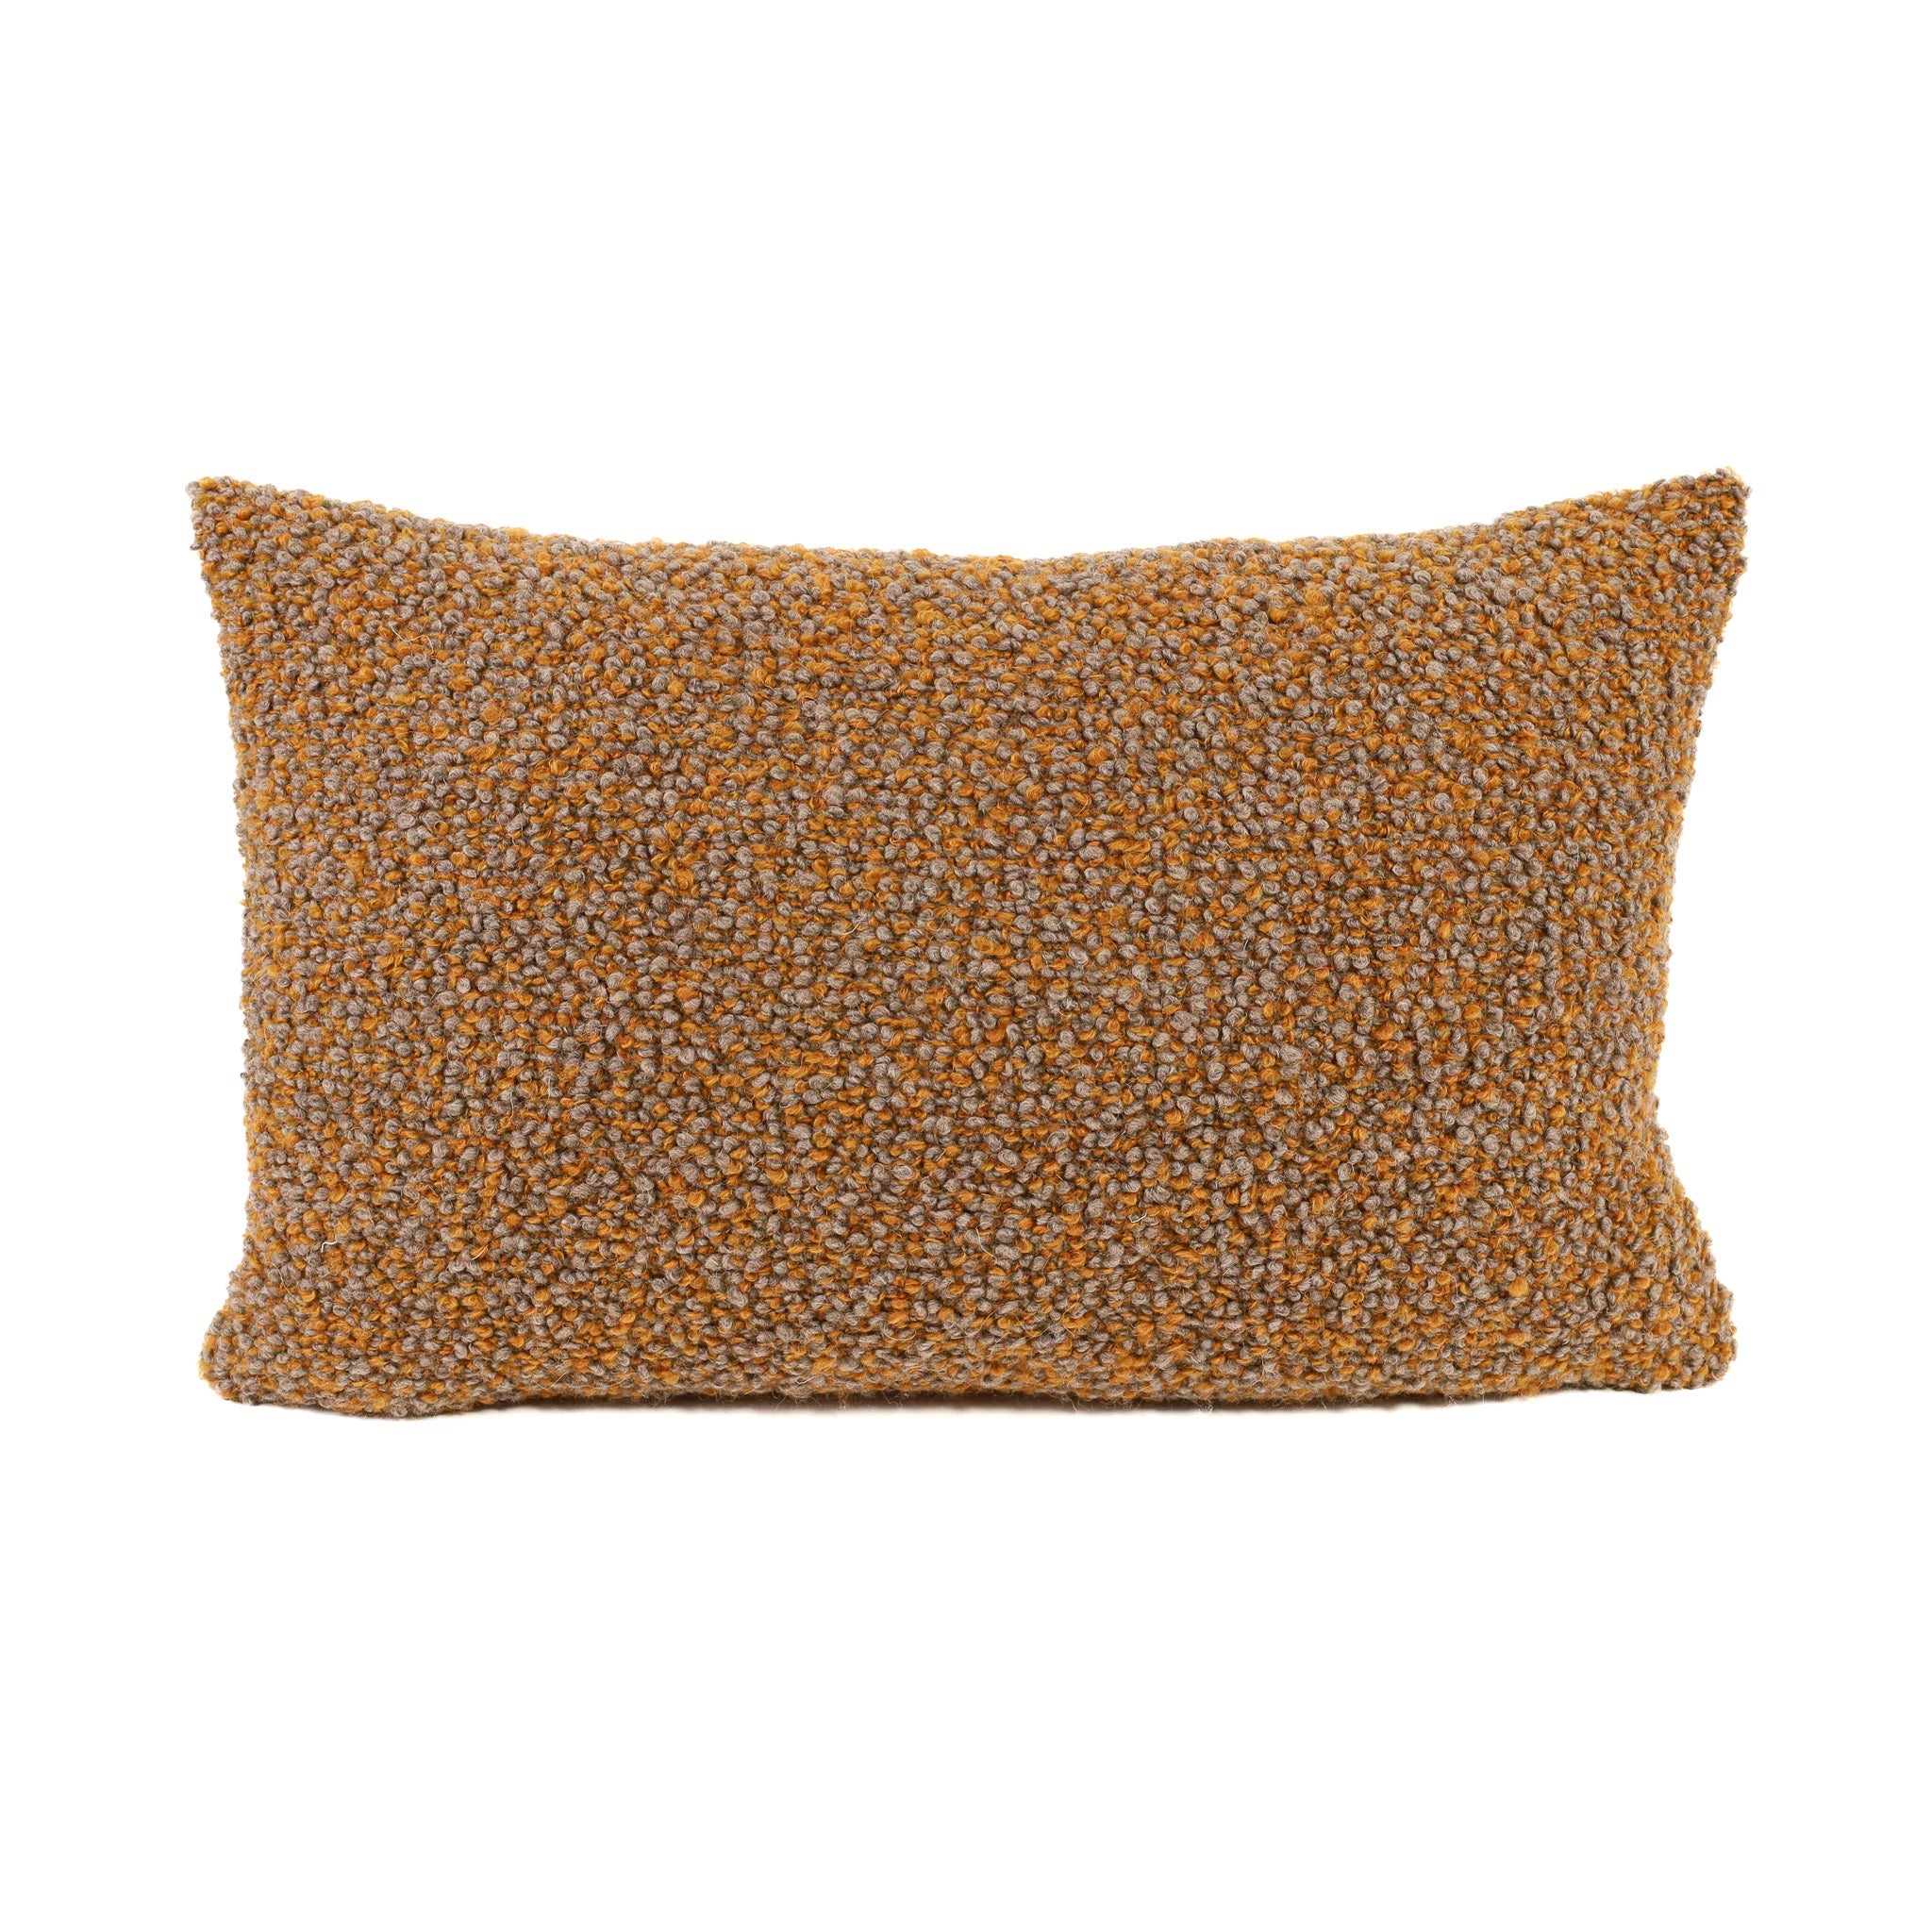 kahlo pillow by uniquity at adorn.house